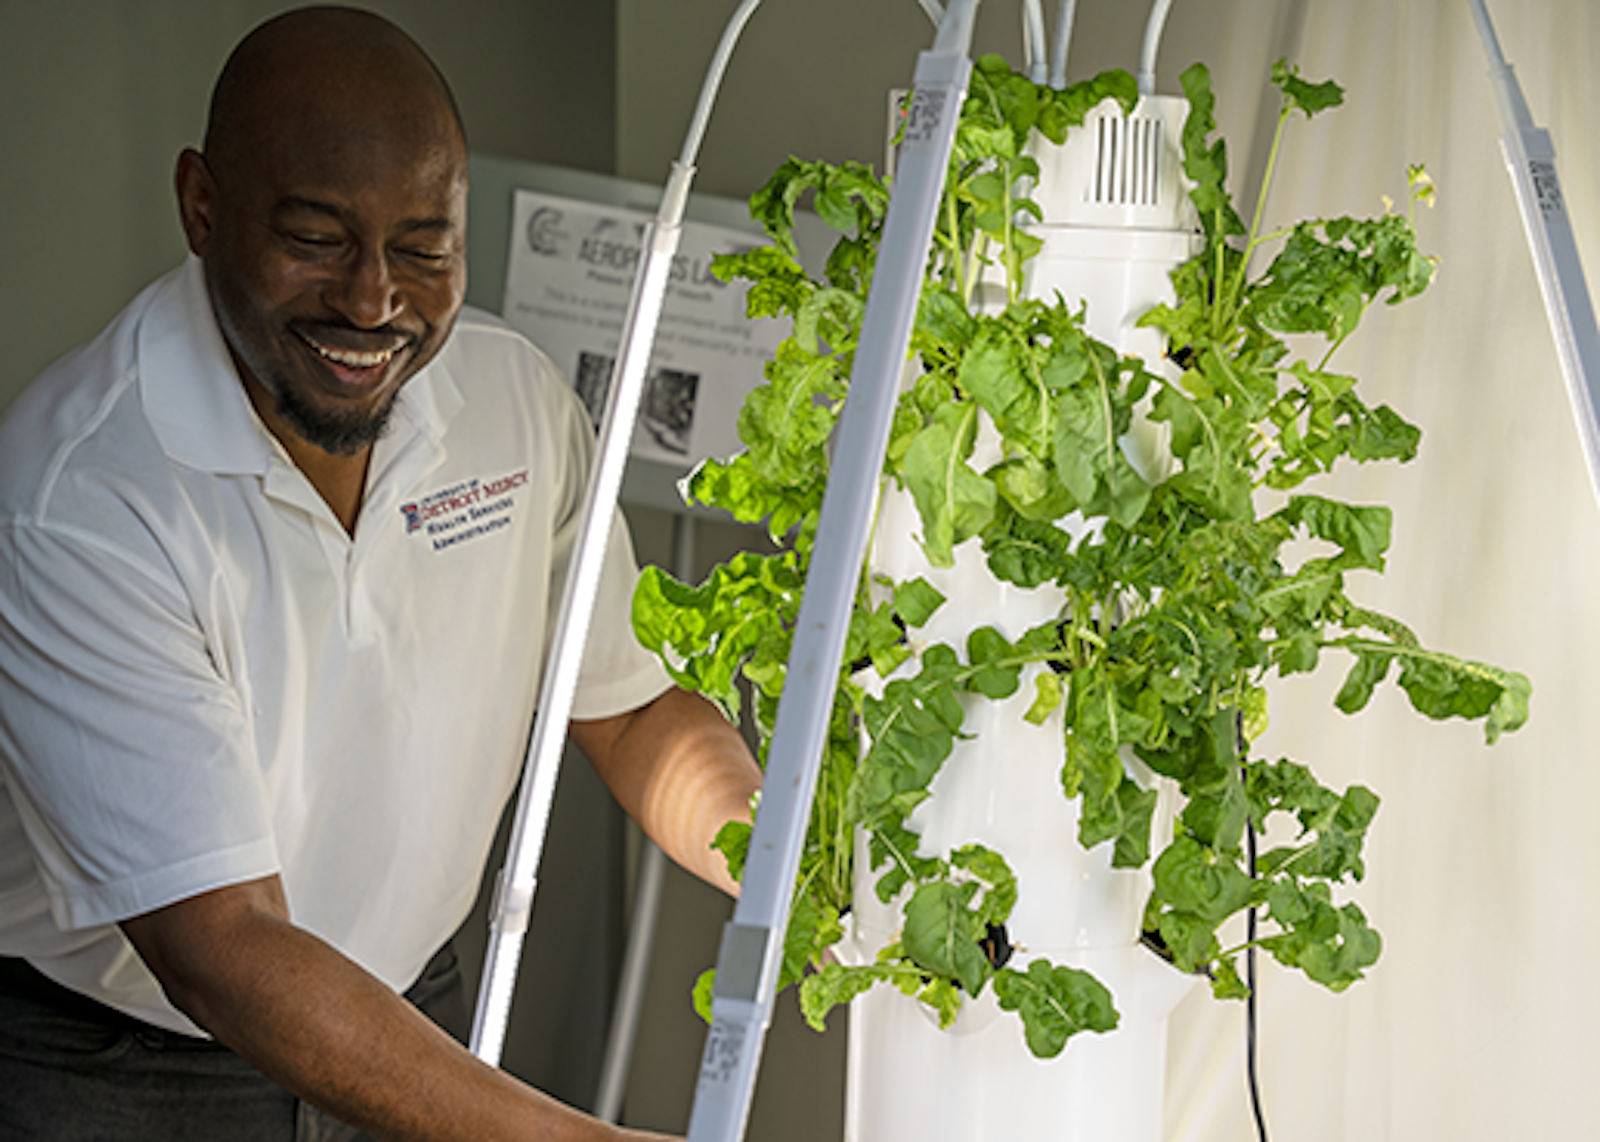 Olla tends to the plants in the center's aeroponics garden, which is one example of the use of emerging technologies that can utilize artificial intelligence applications to improve the lives of those in the local community, he said.